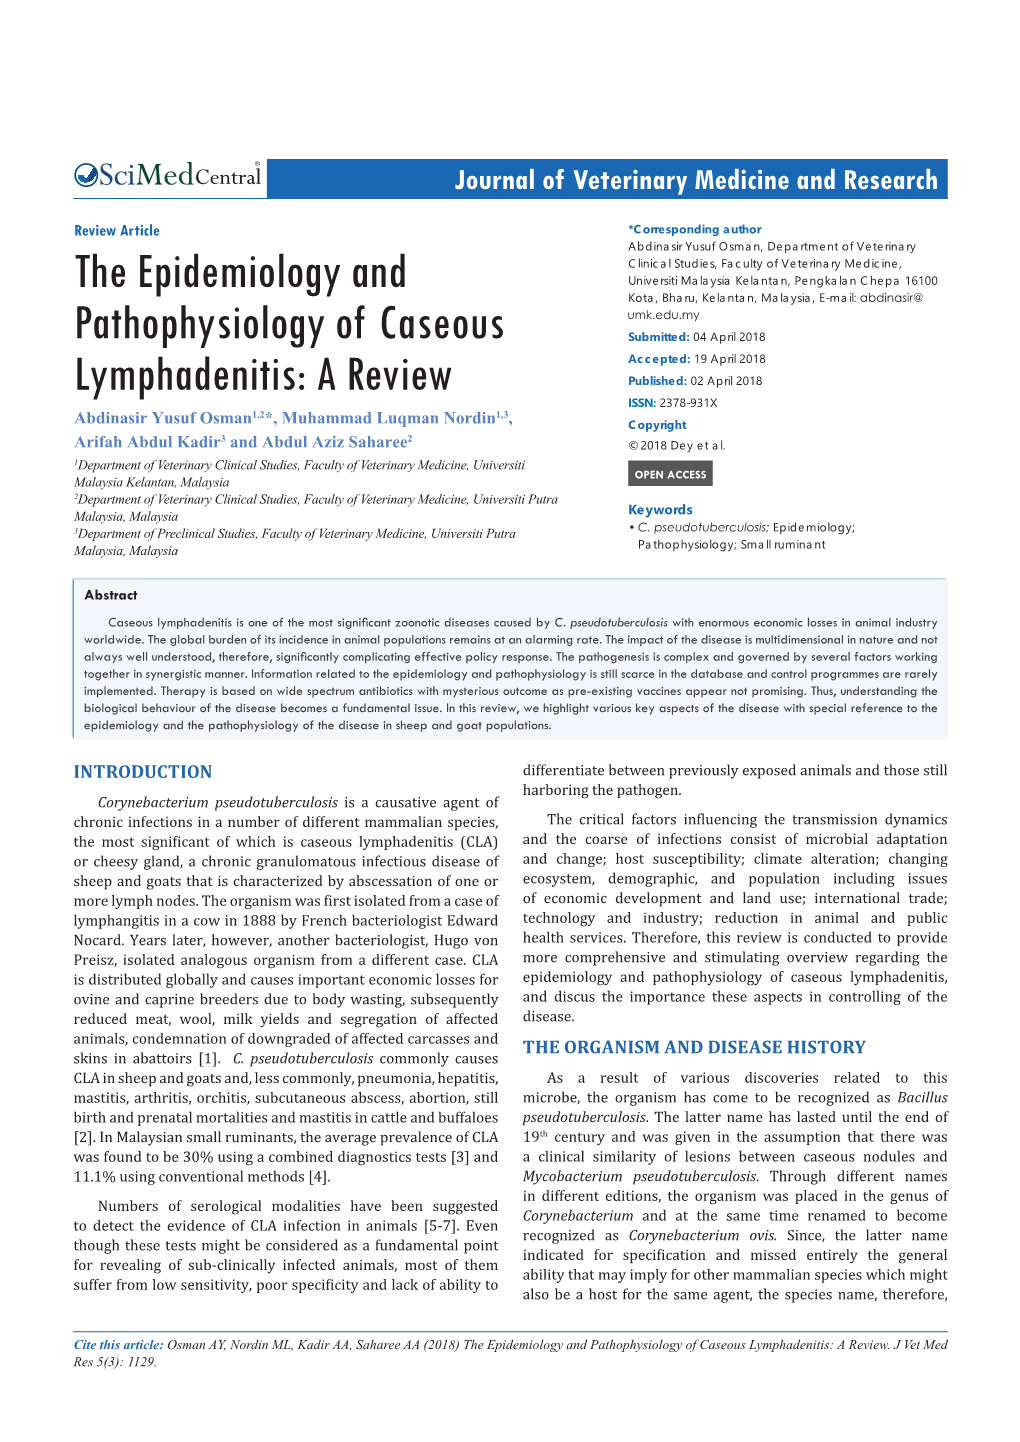 The Epidemiology and Pathophysiology of Caseous Lymphadenitis: a Review